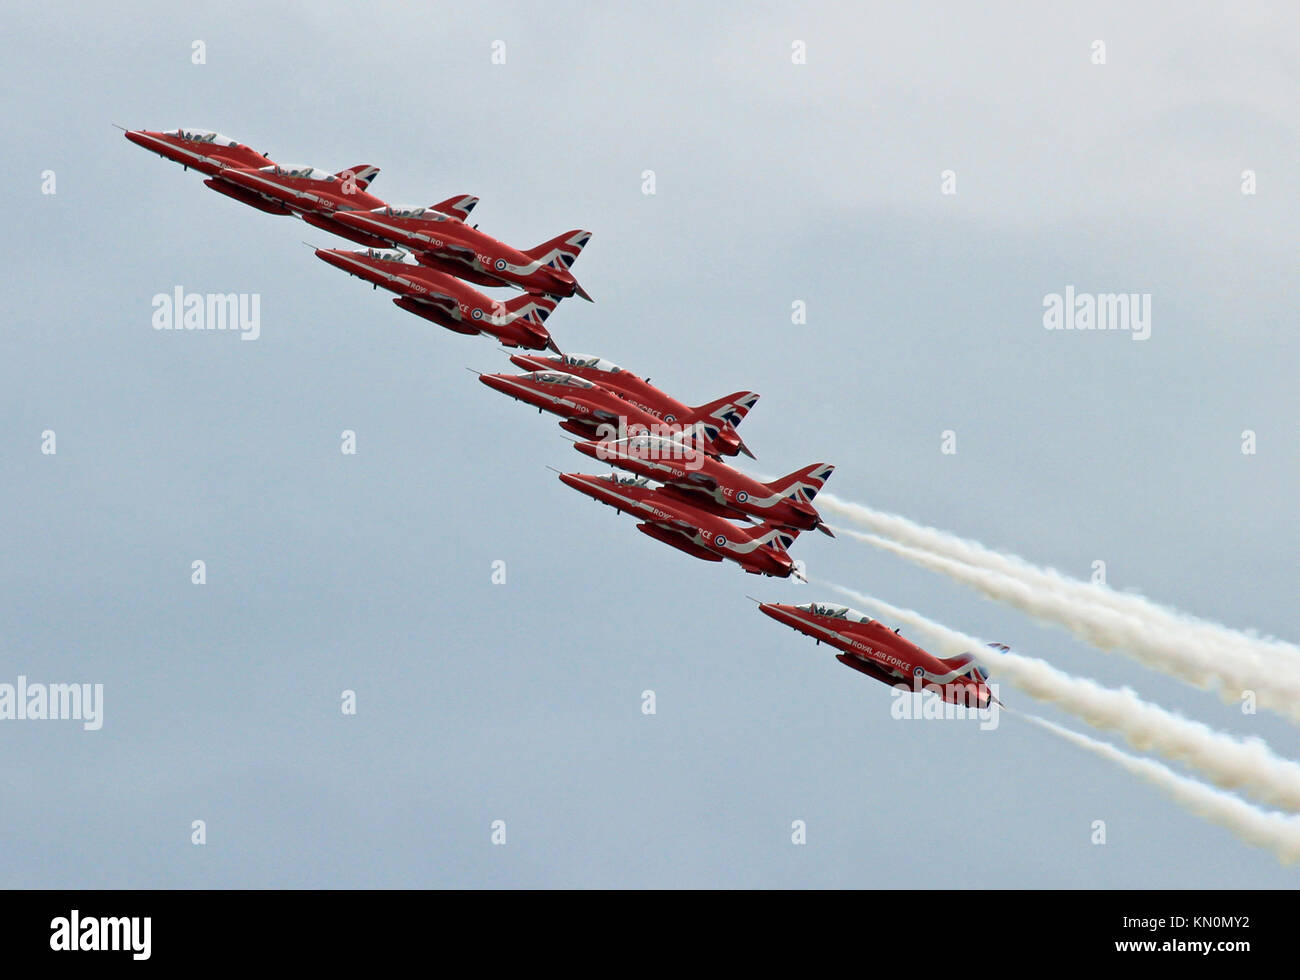 Red Arrows display team at Clacton airshow August 2015 Stock Photo